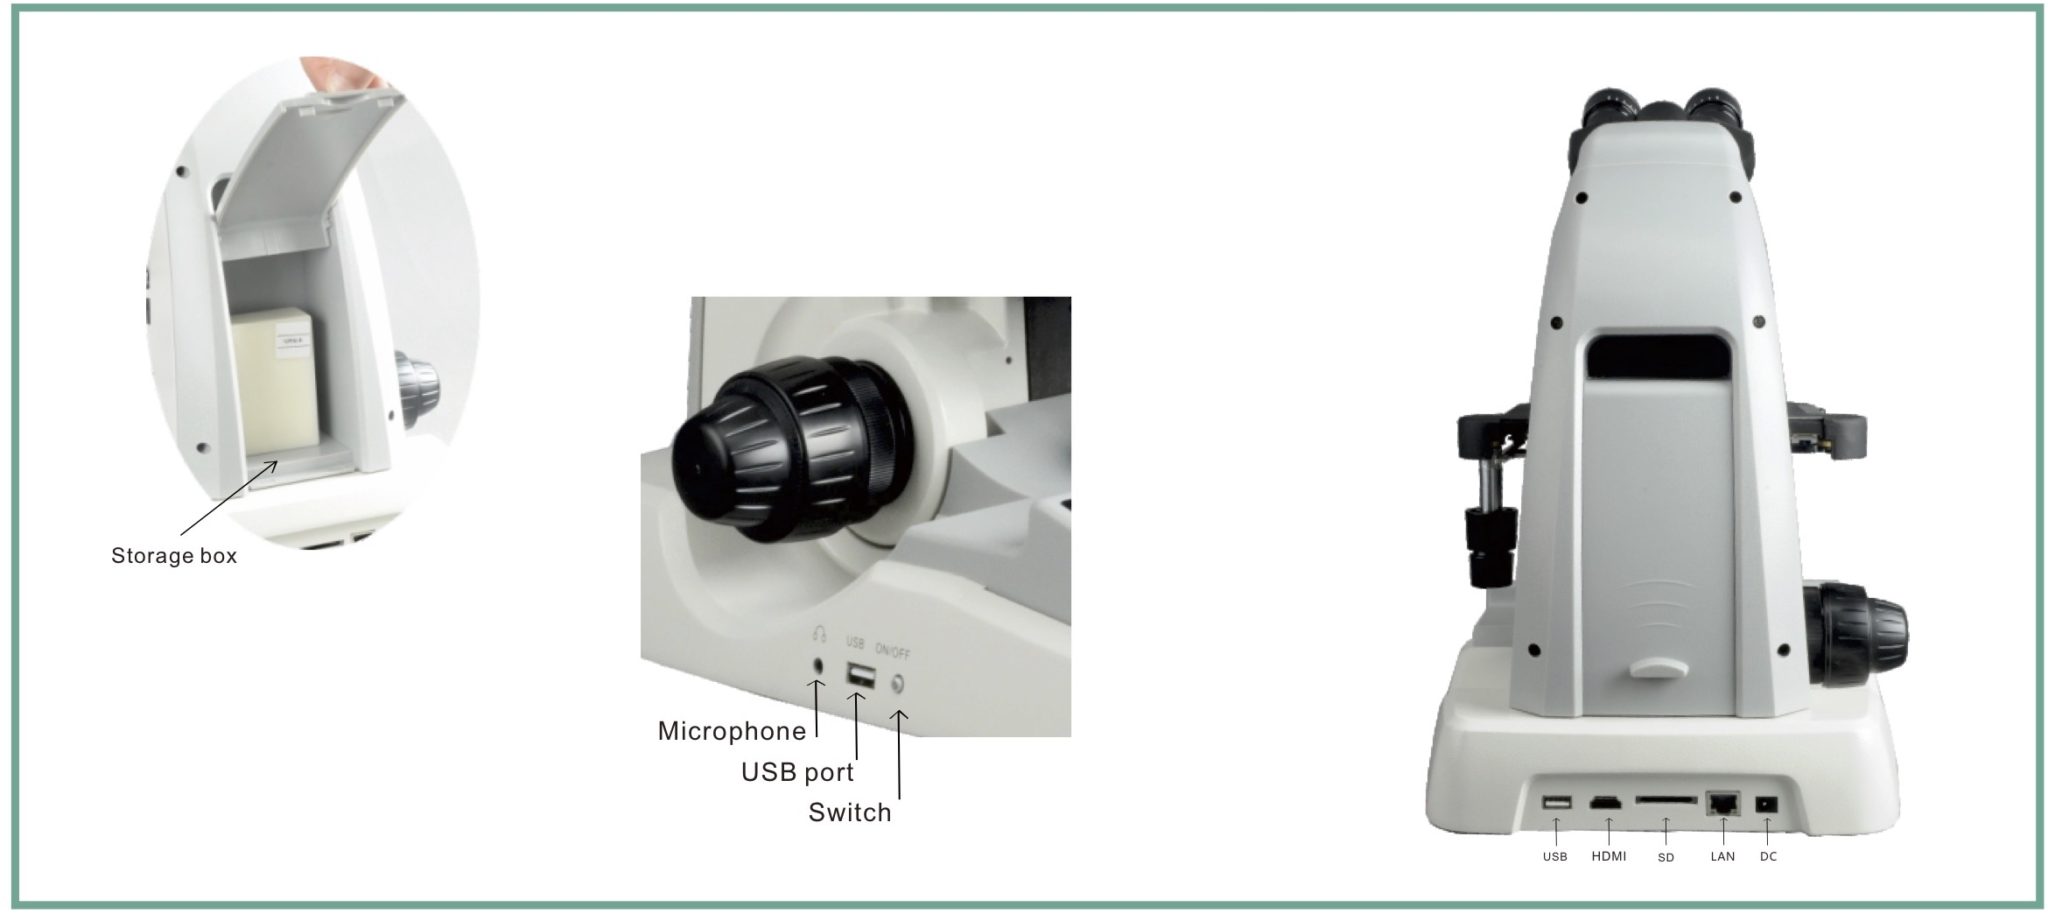 BUM340L-16MP Upright Biological/Clinical Microscope with 16MP Camera & 9.7" Touch Screen-10282